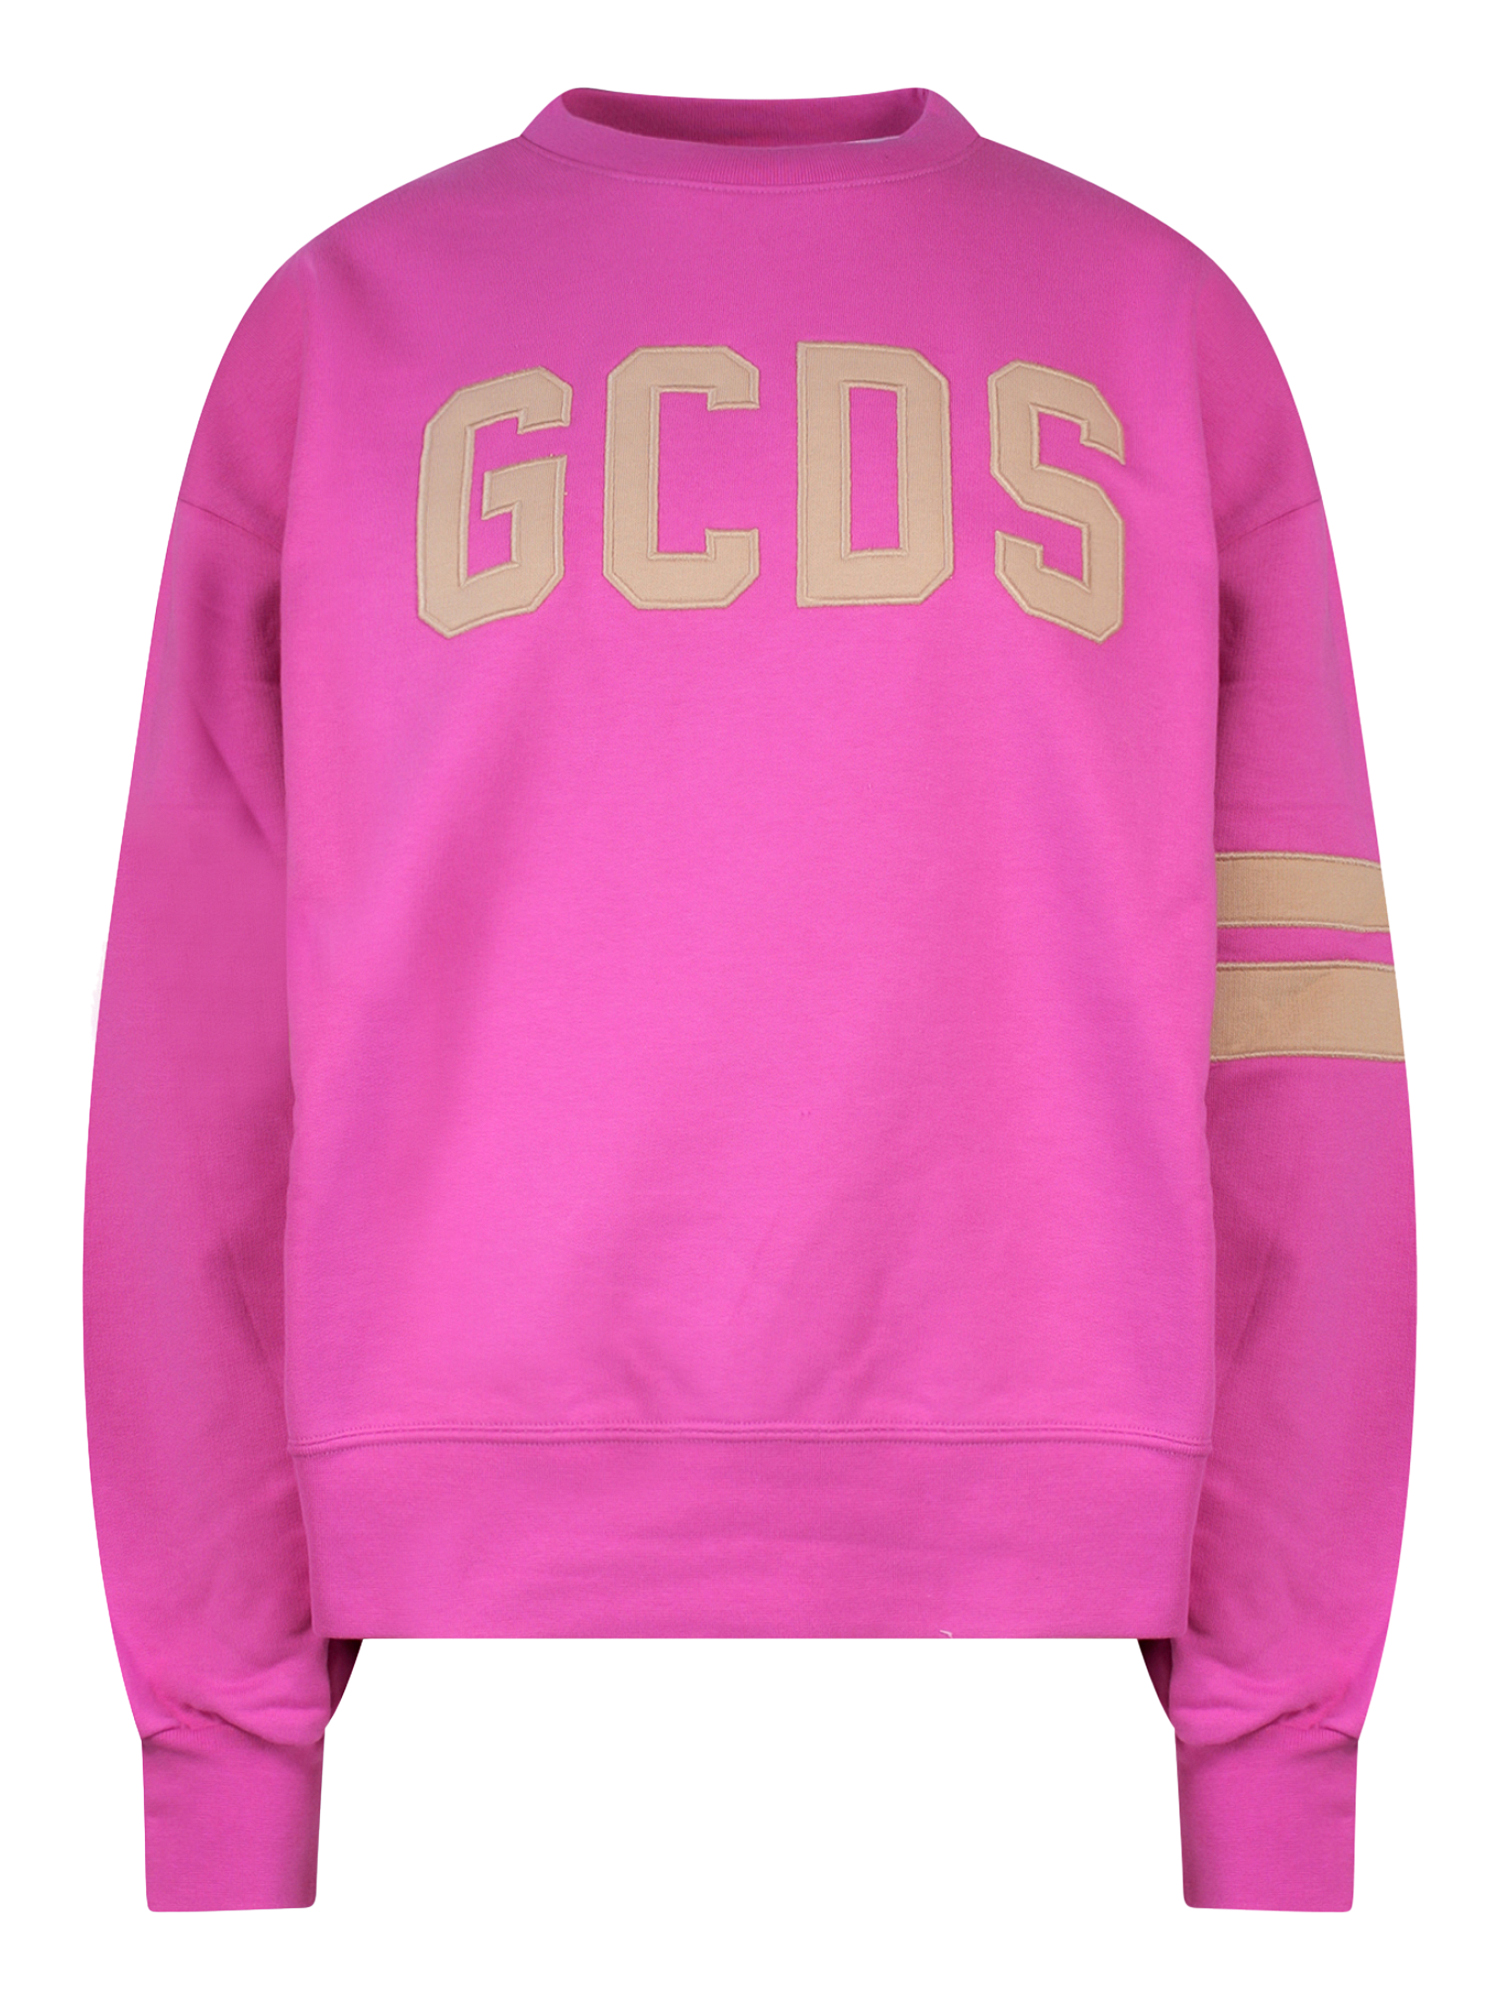 Condition: New With Tag,  Cotton, Color: Pink - S - S -